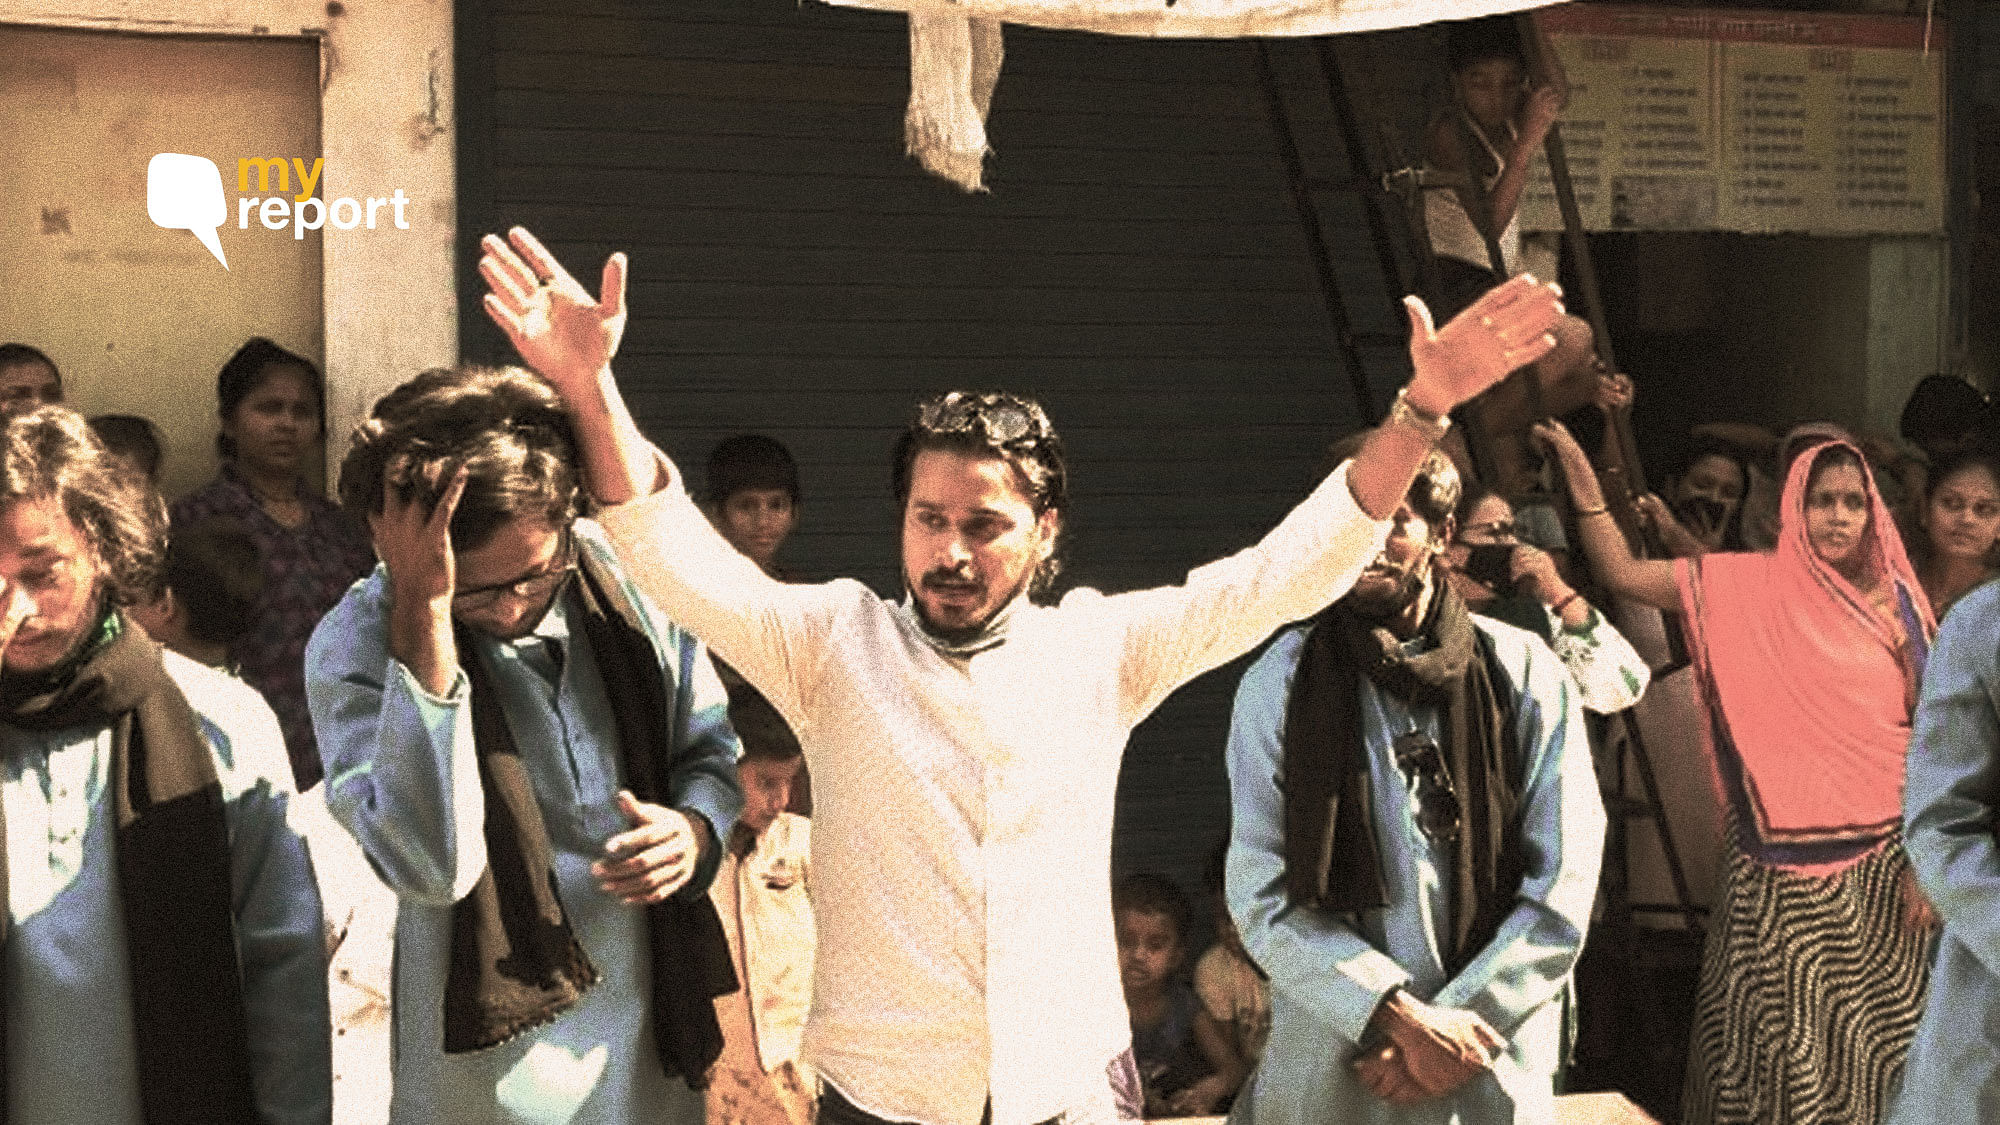 Nizamuddin Shah, an actor from the Netflix original <i>Yeh Ballet, </i>has been training kids into theatre.